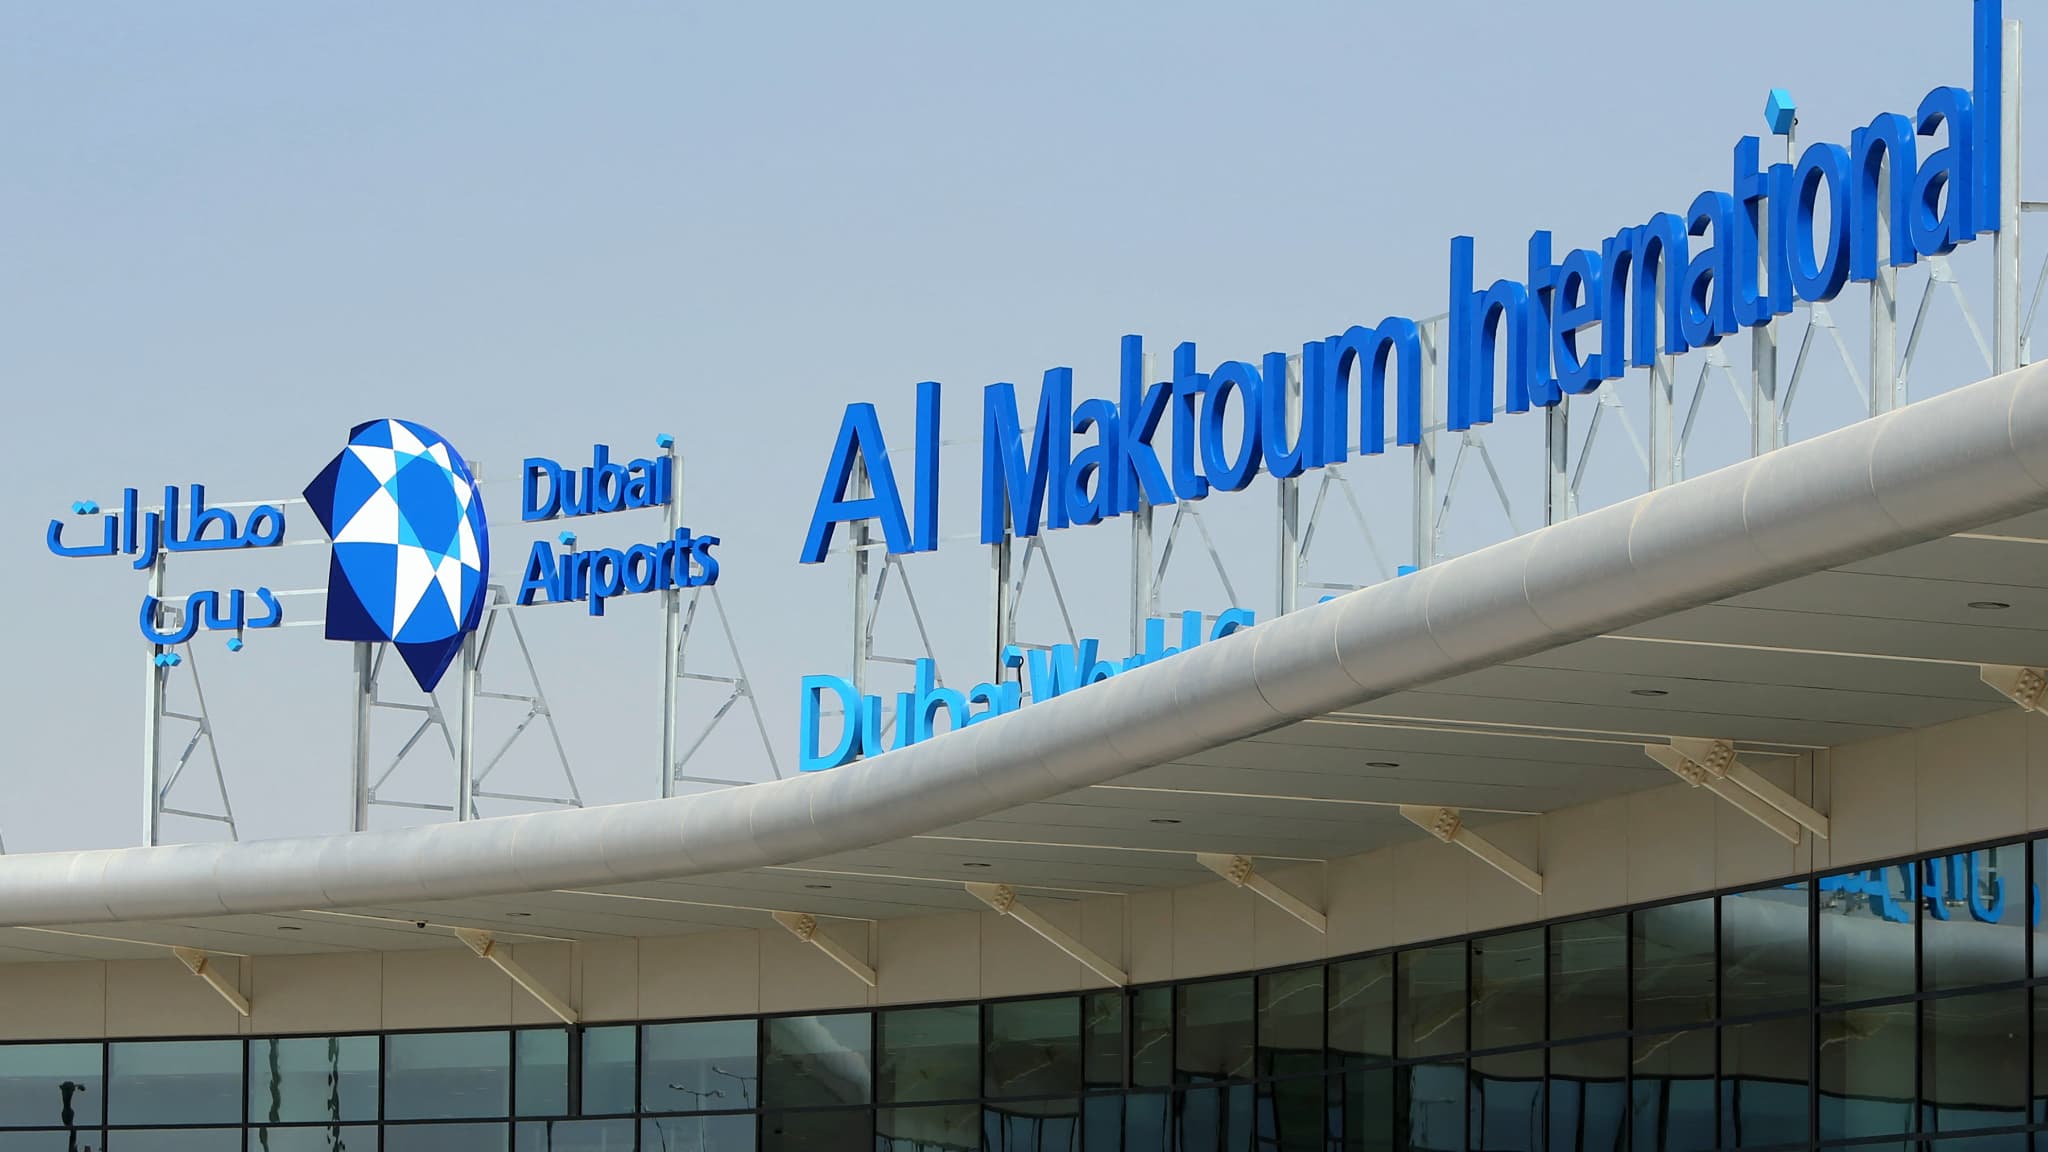 Dubai wants to build ‘the largest airport in the world’